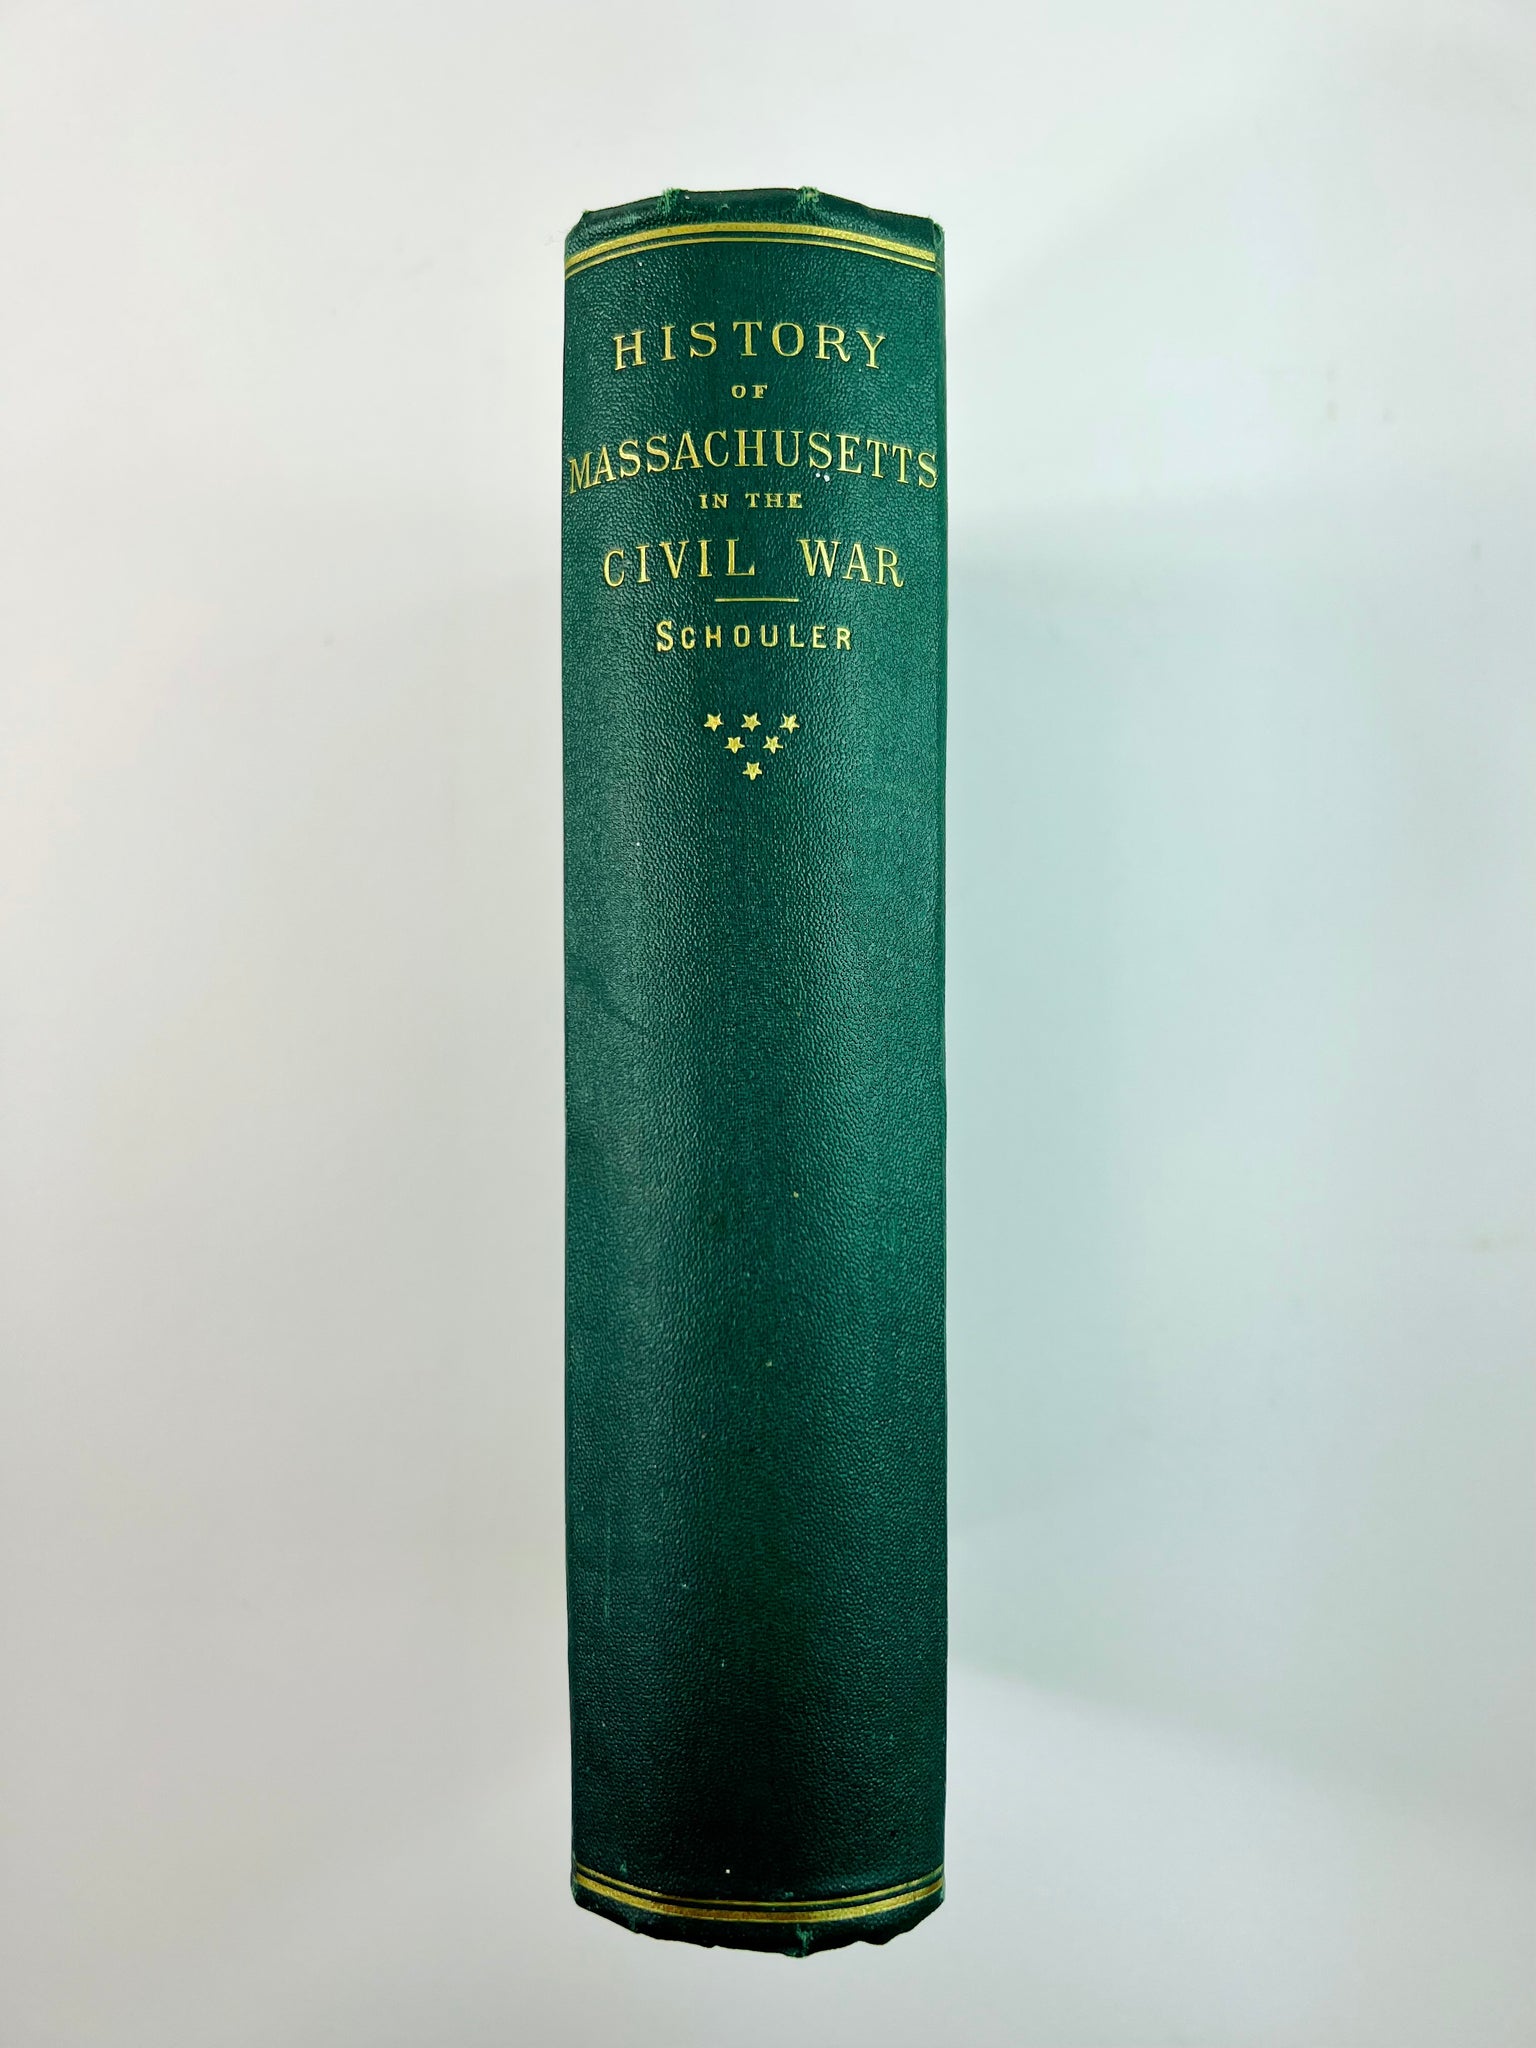 SCHOULER, William. A History of Massachusetts in the Civil War.